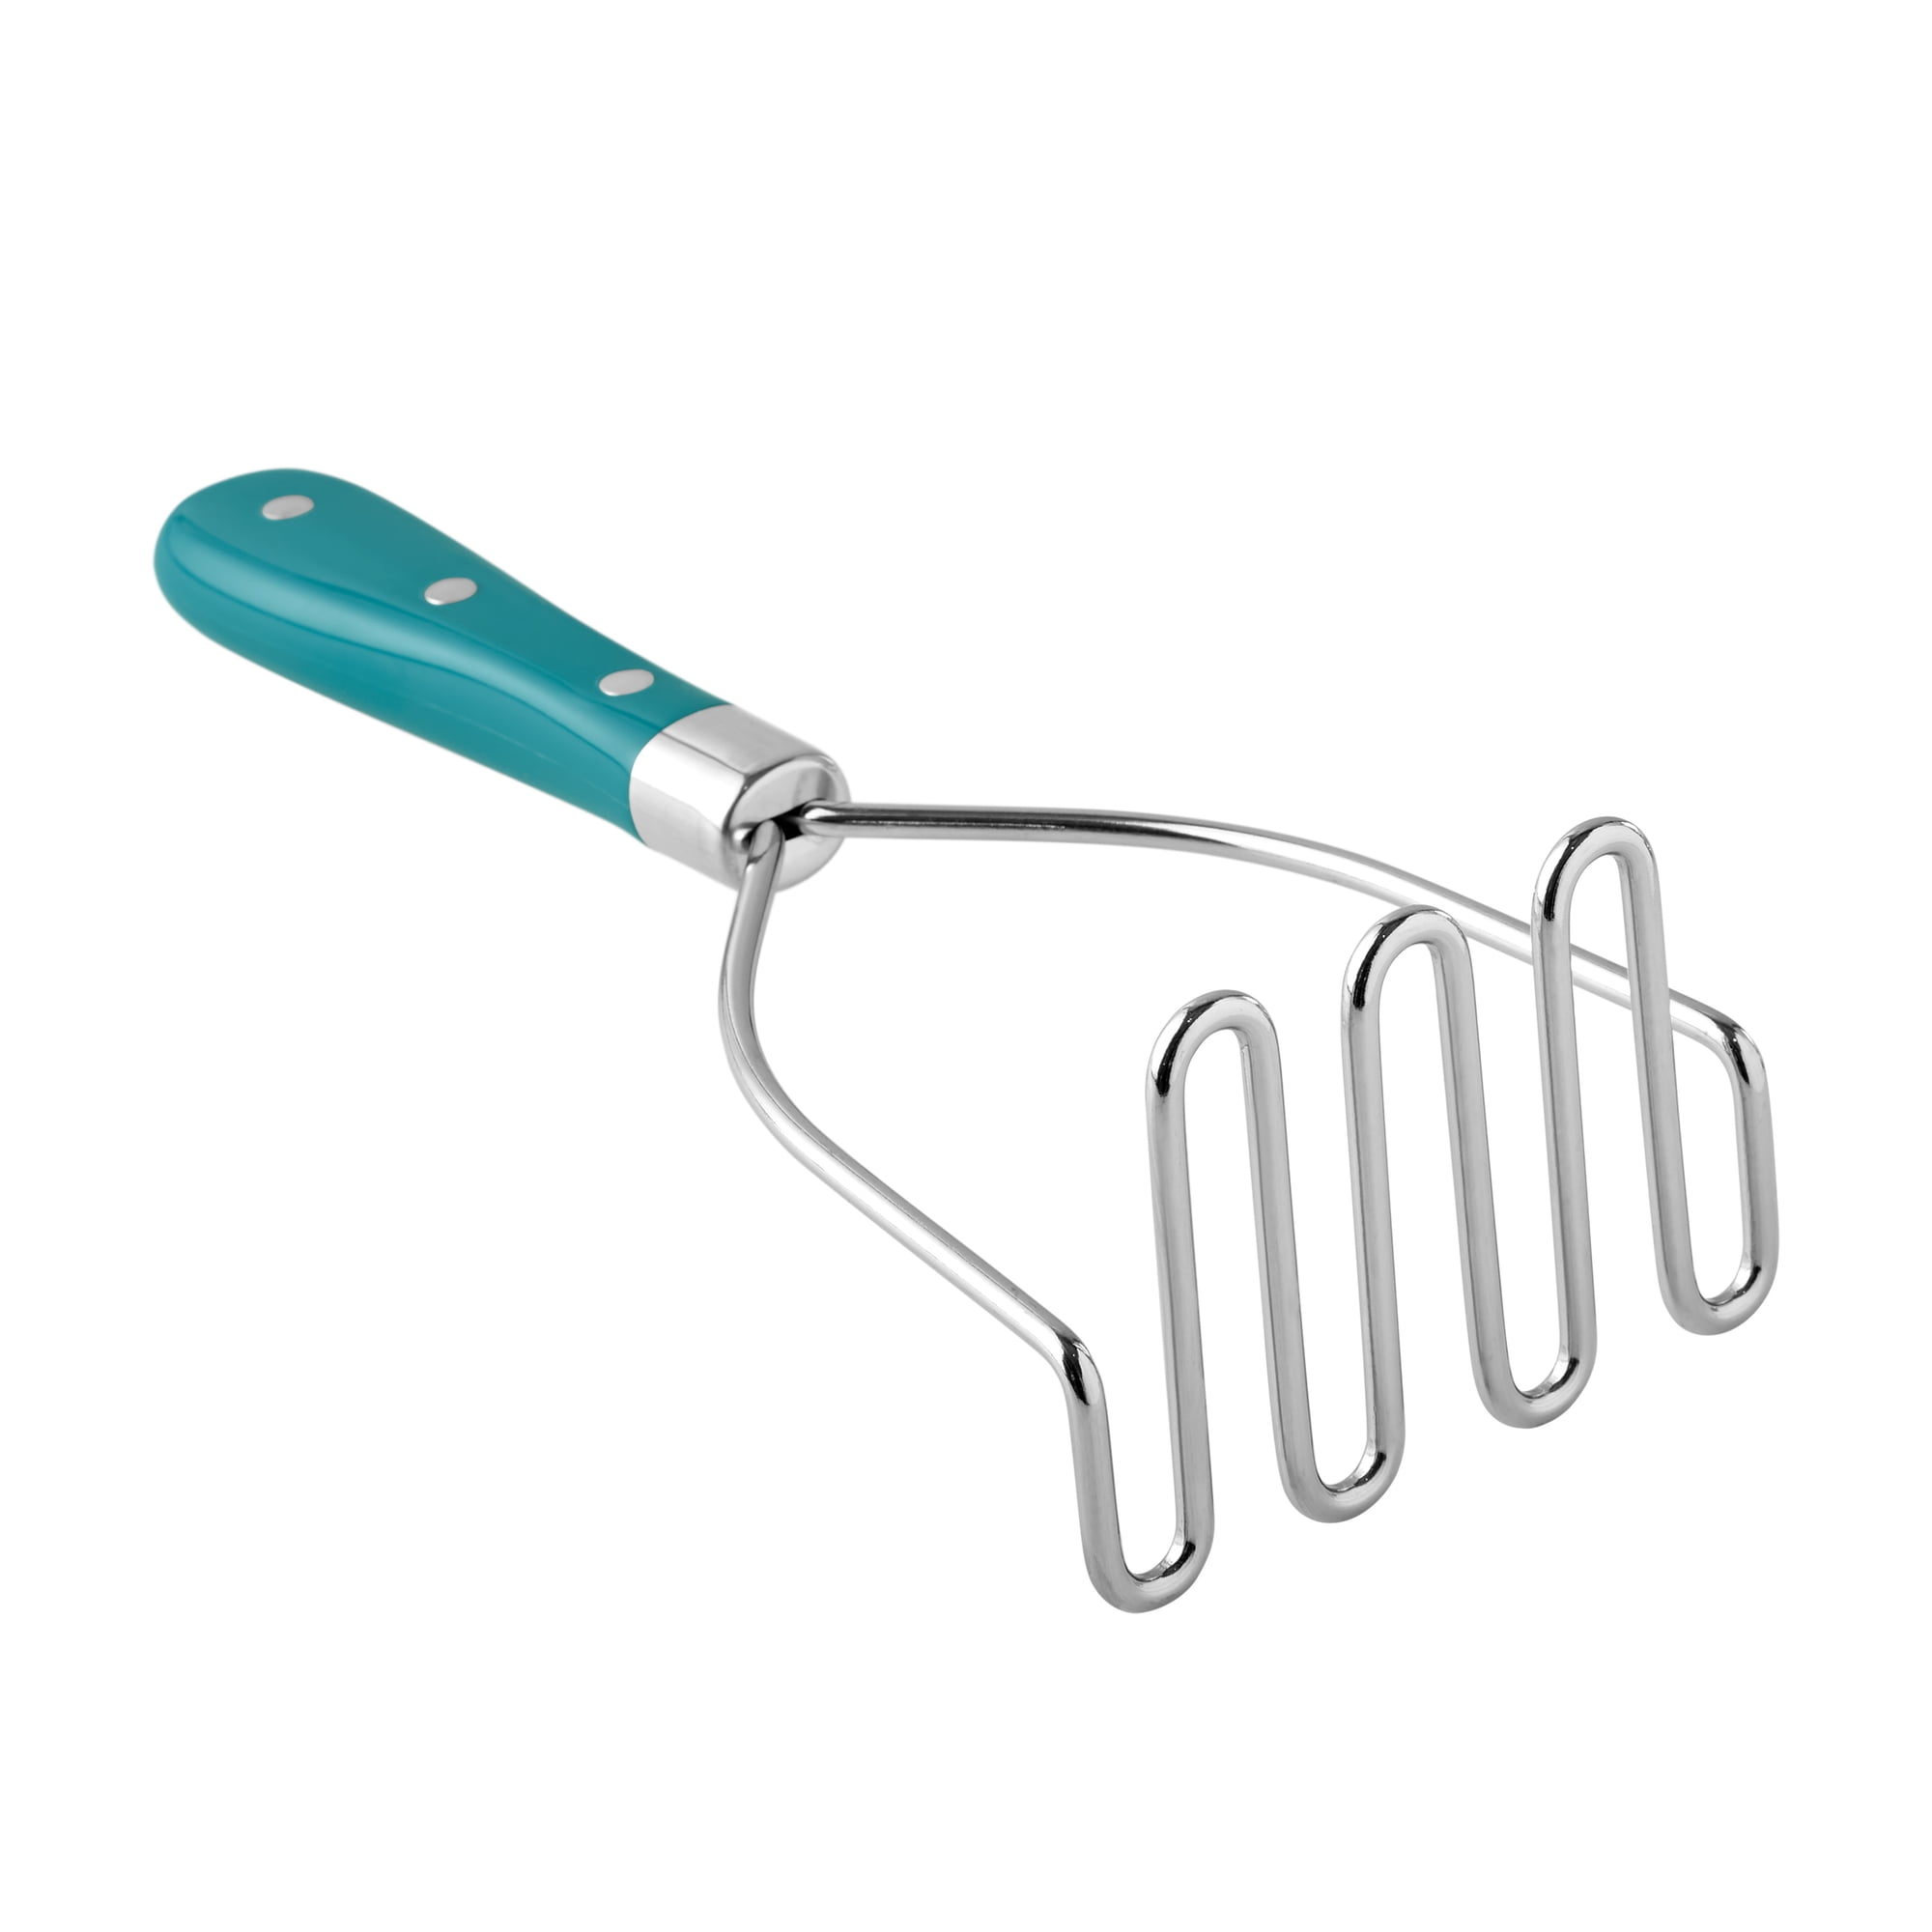 GIR Stainless Steel Potato Masher - Perforated and Wire Masher